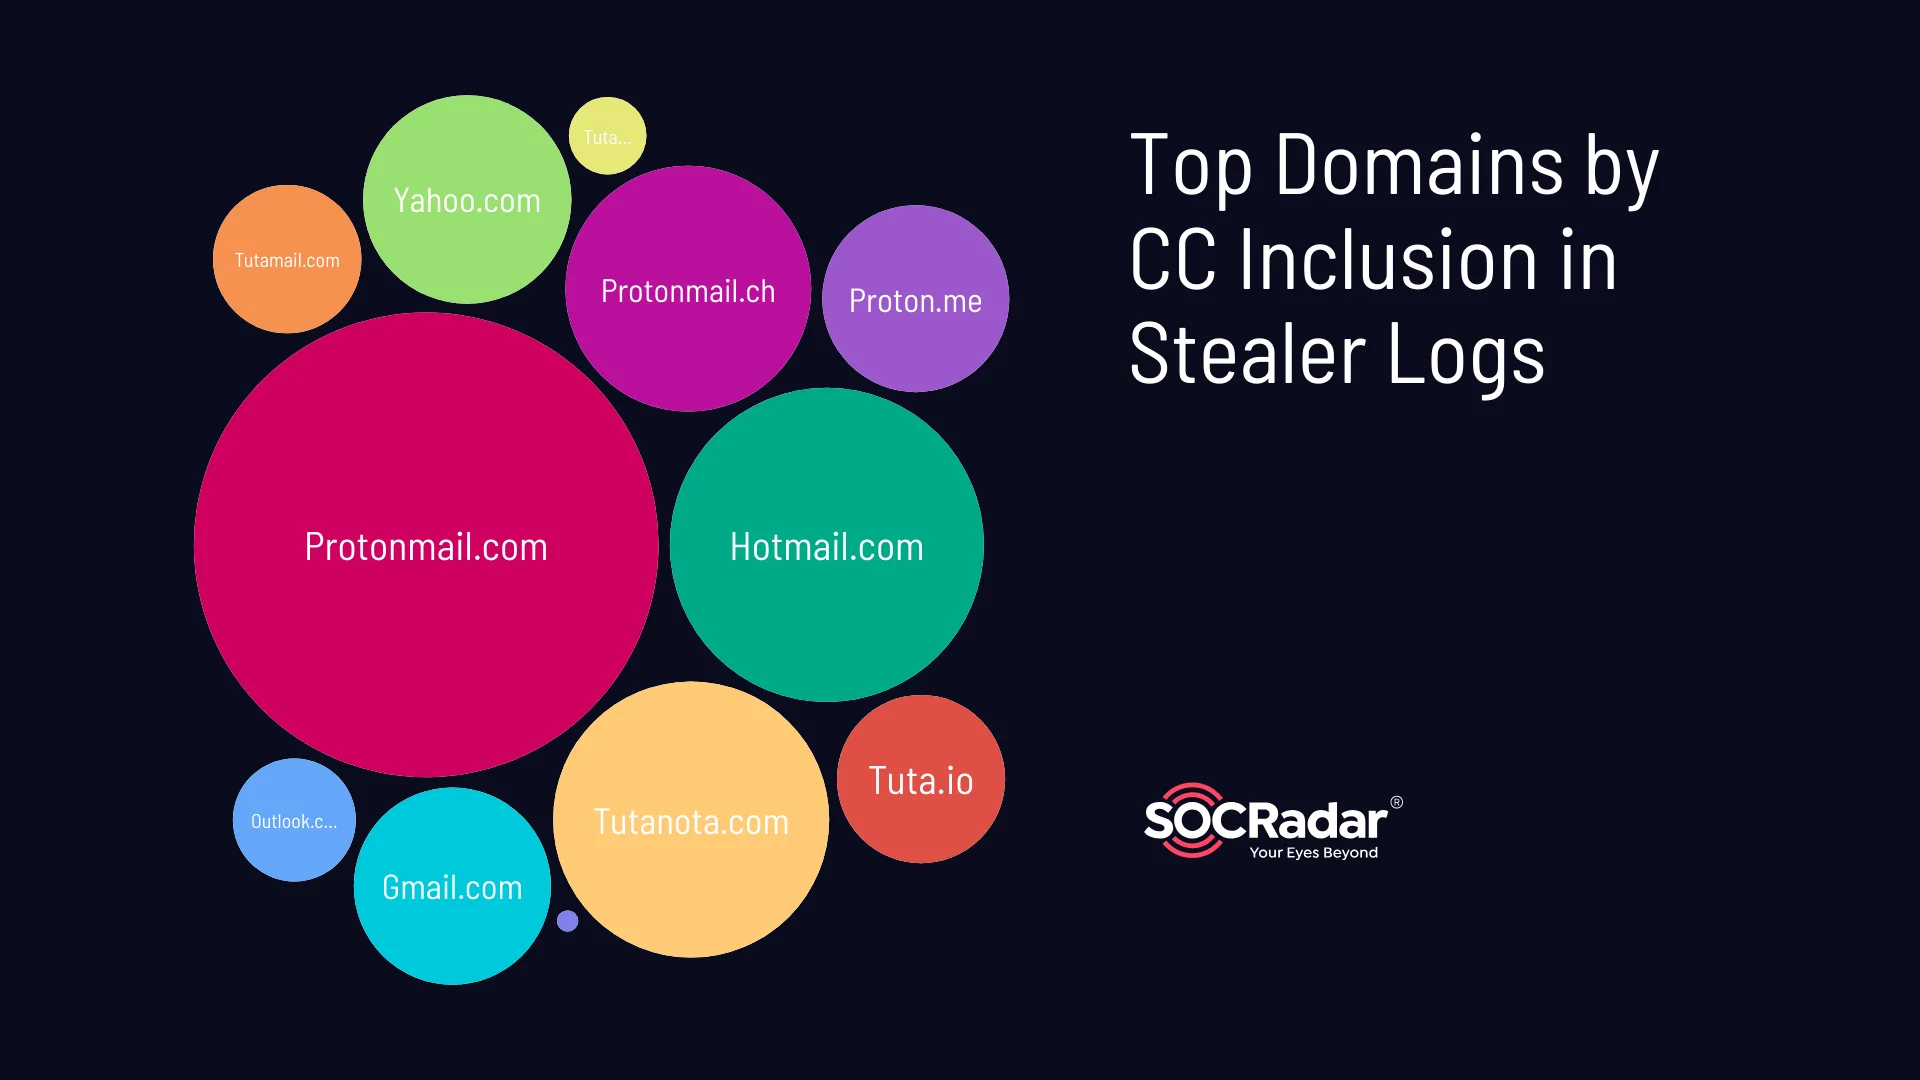 Top domains by CC inclusion